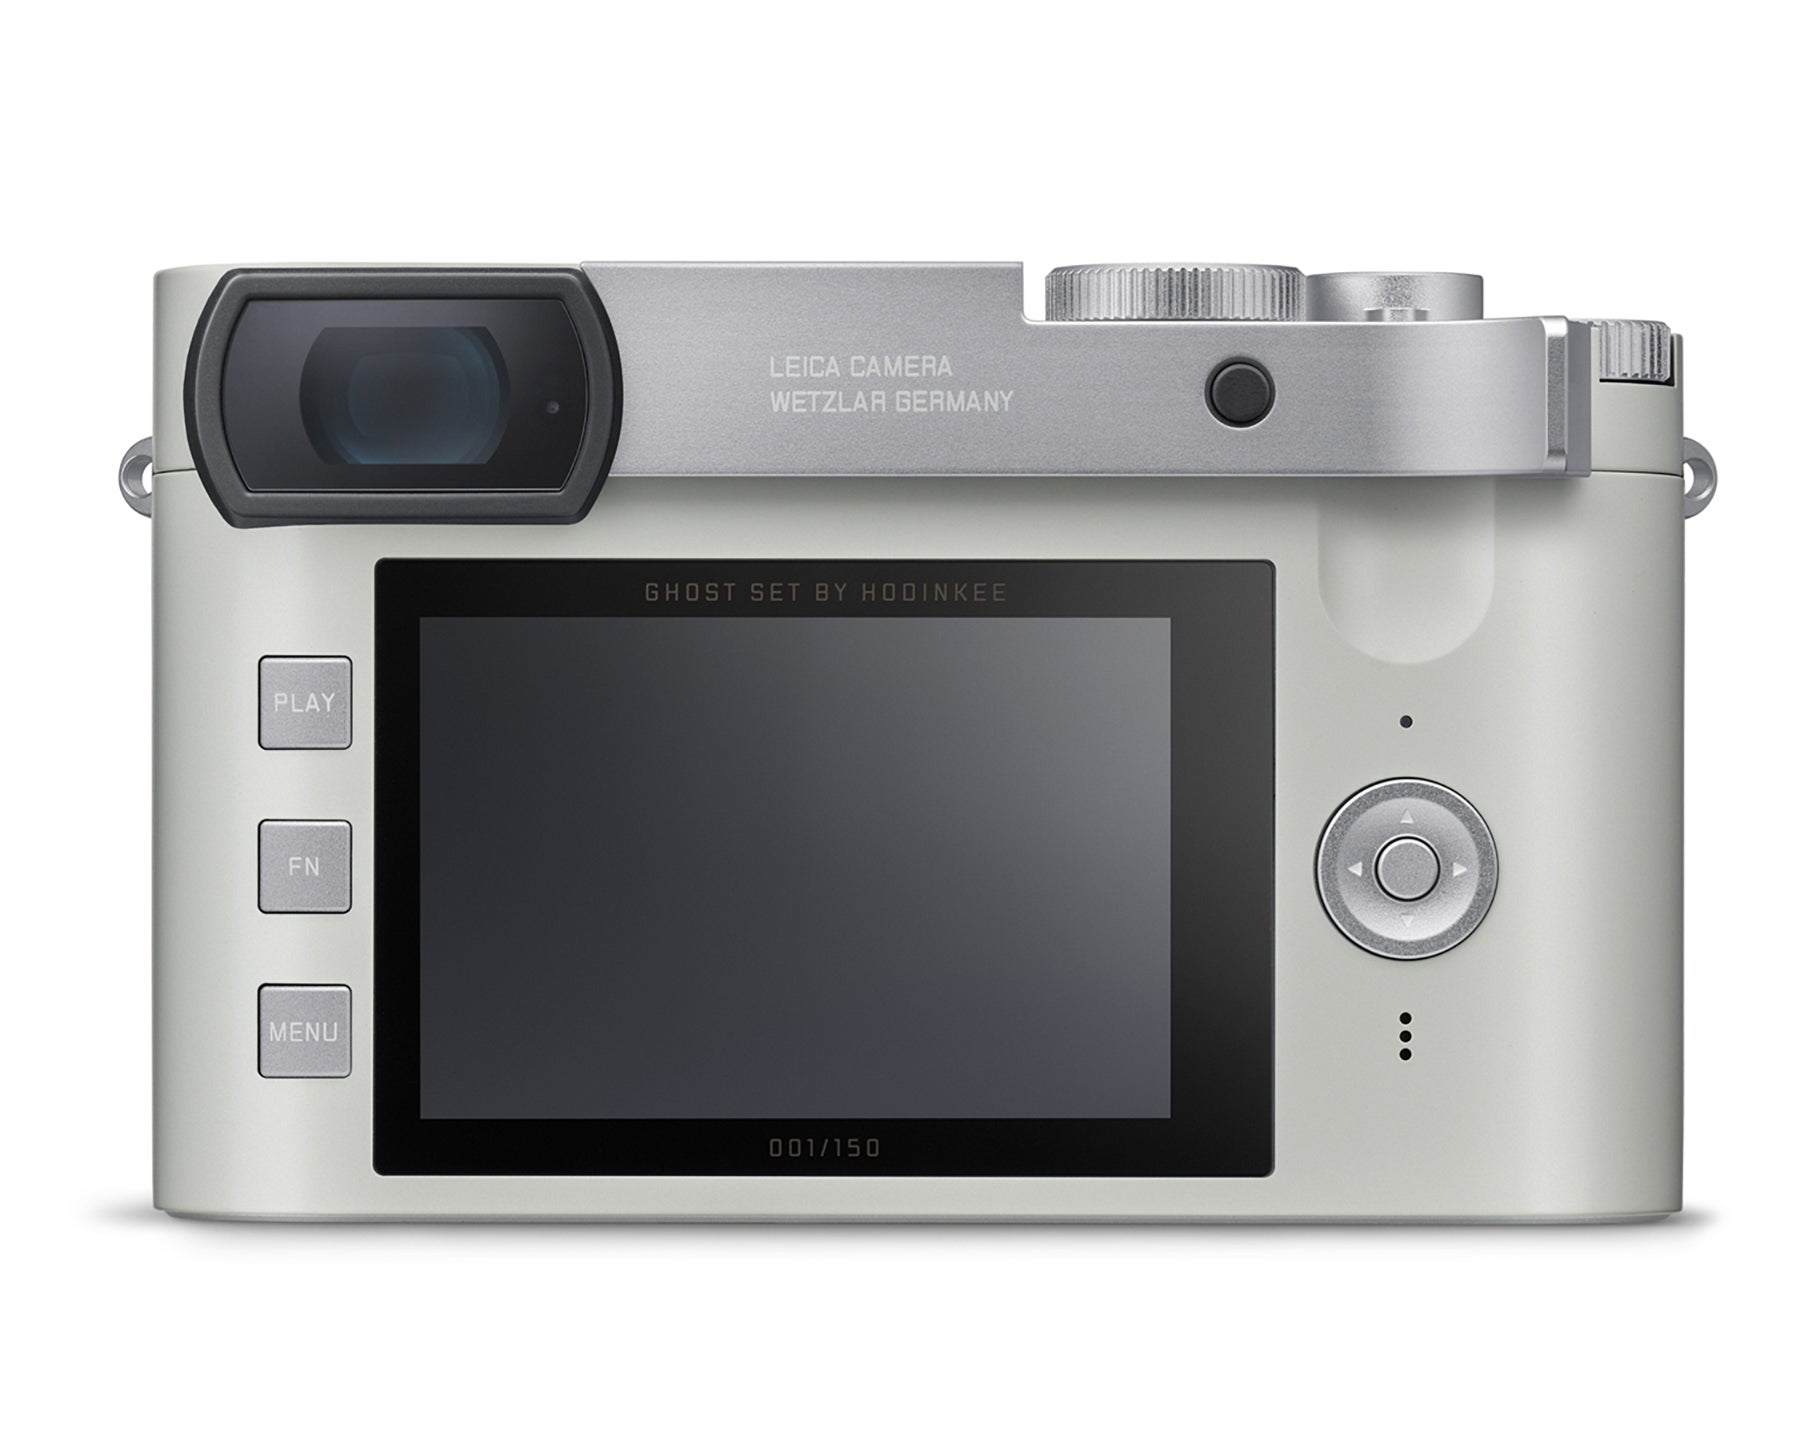 The Leica Q2 "Ghost" by Hodinkee